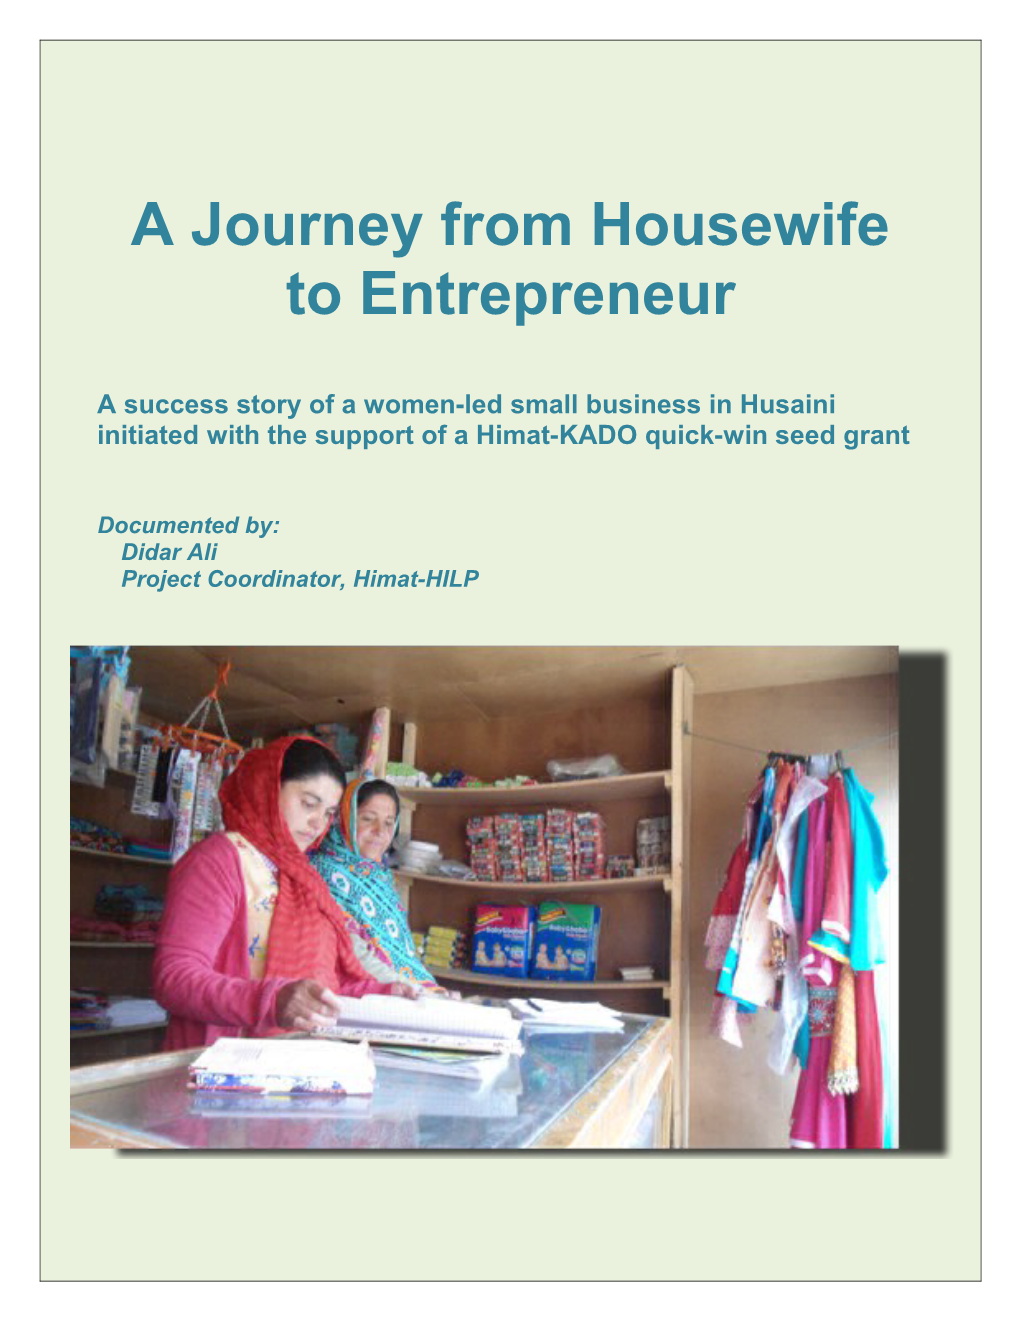 Journey from Housewife to Entrepreneurship